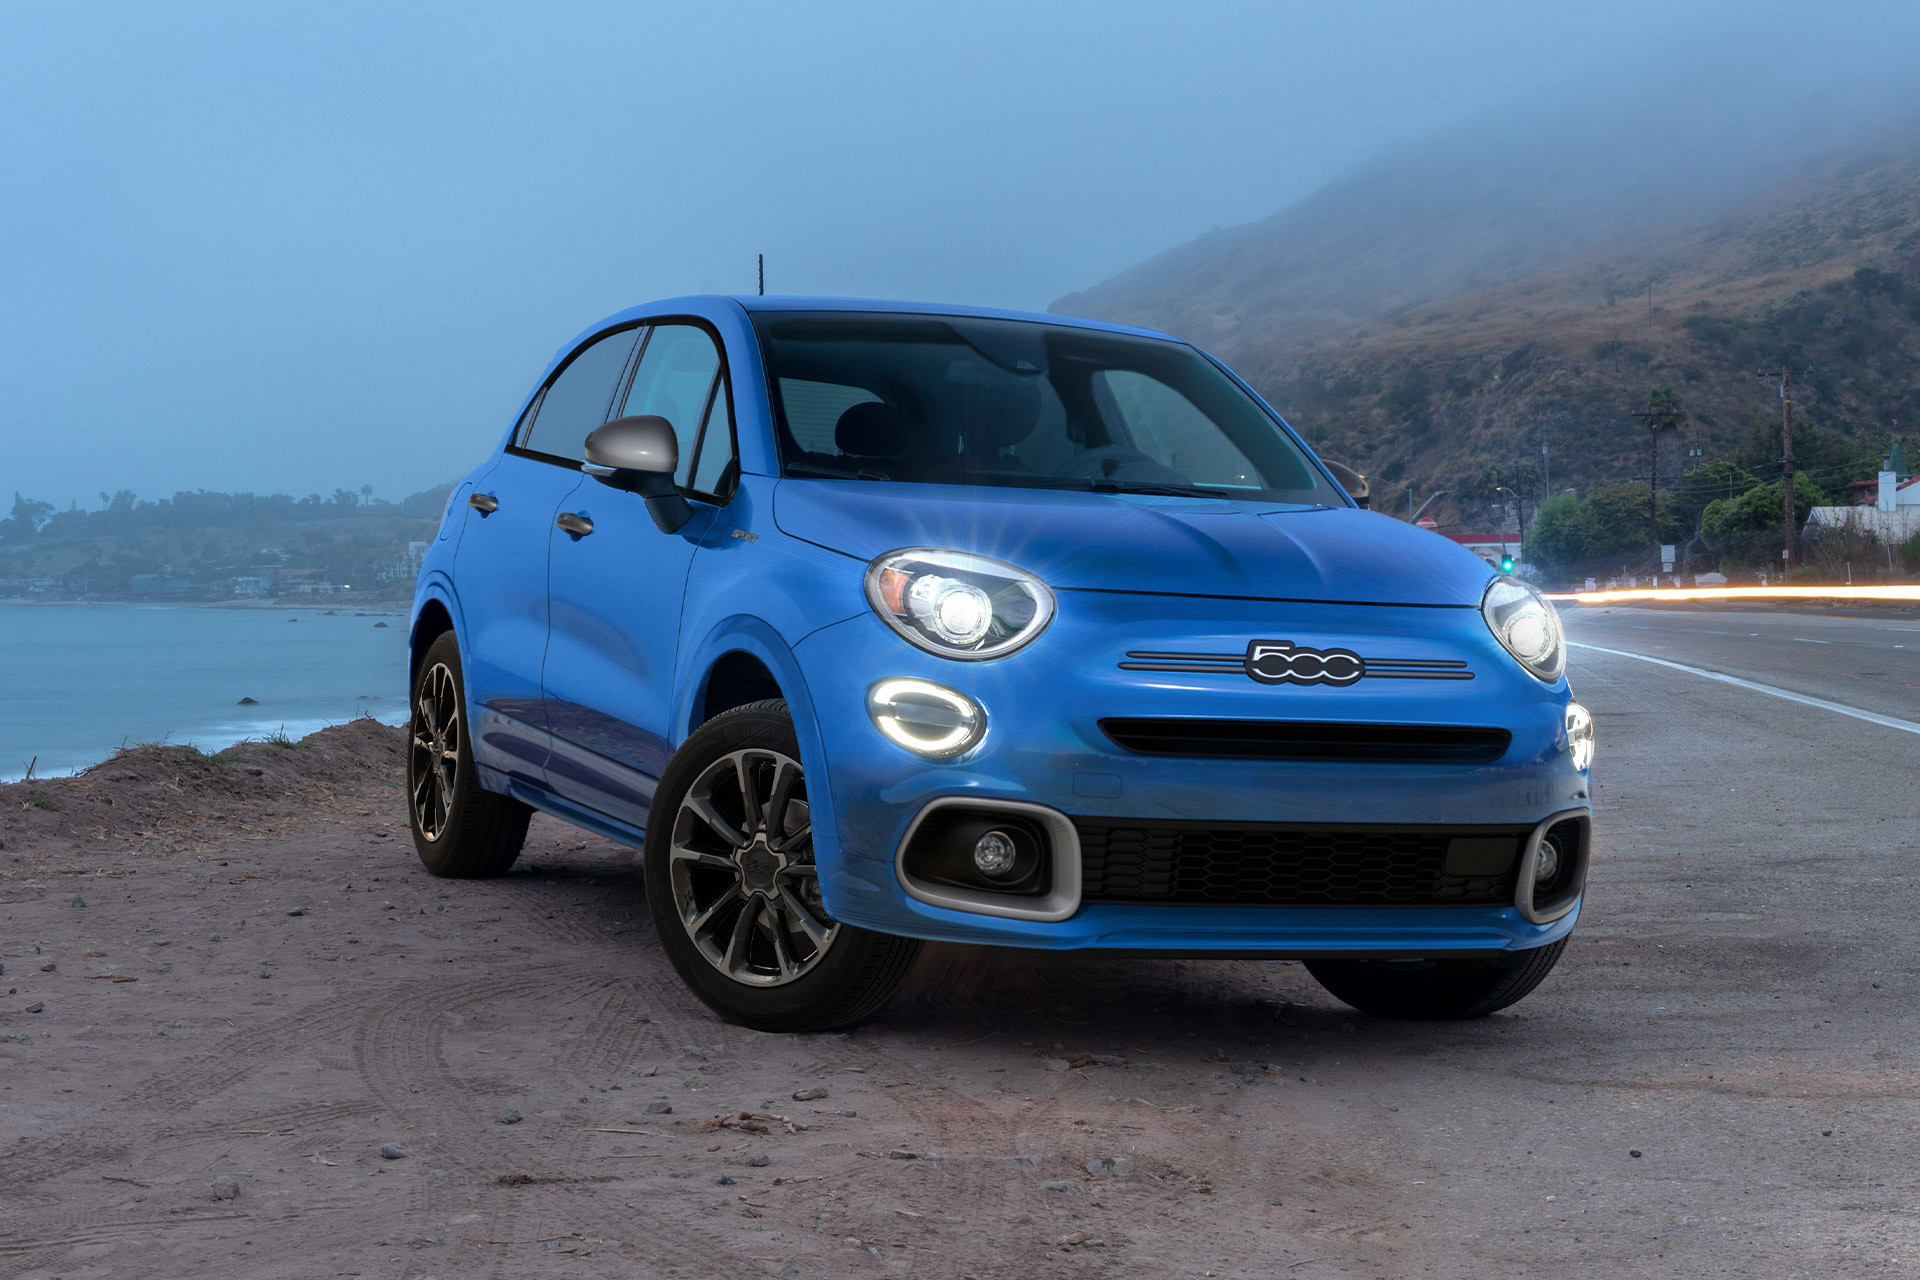 Passenger profile view of a blue 2023 Fiat 500X with headlamps and wheel trim displayed.